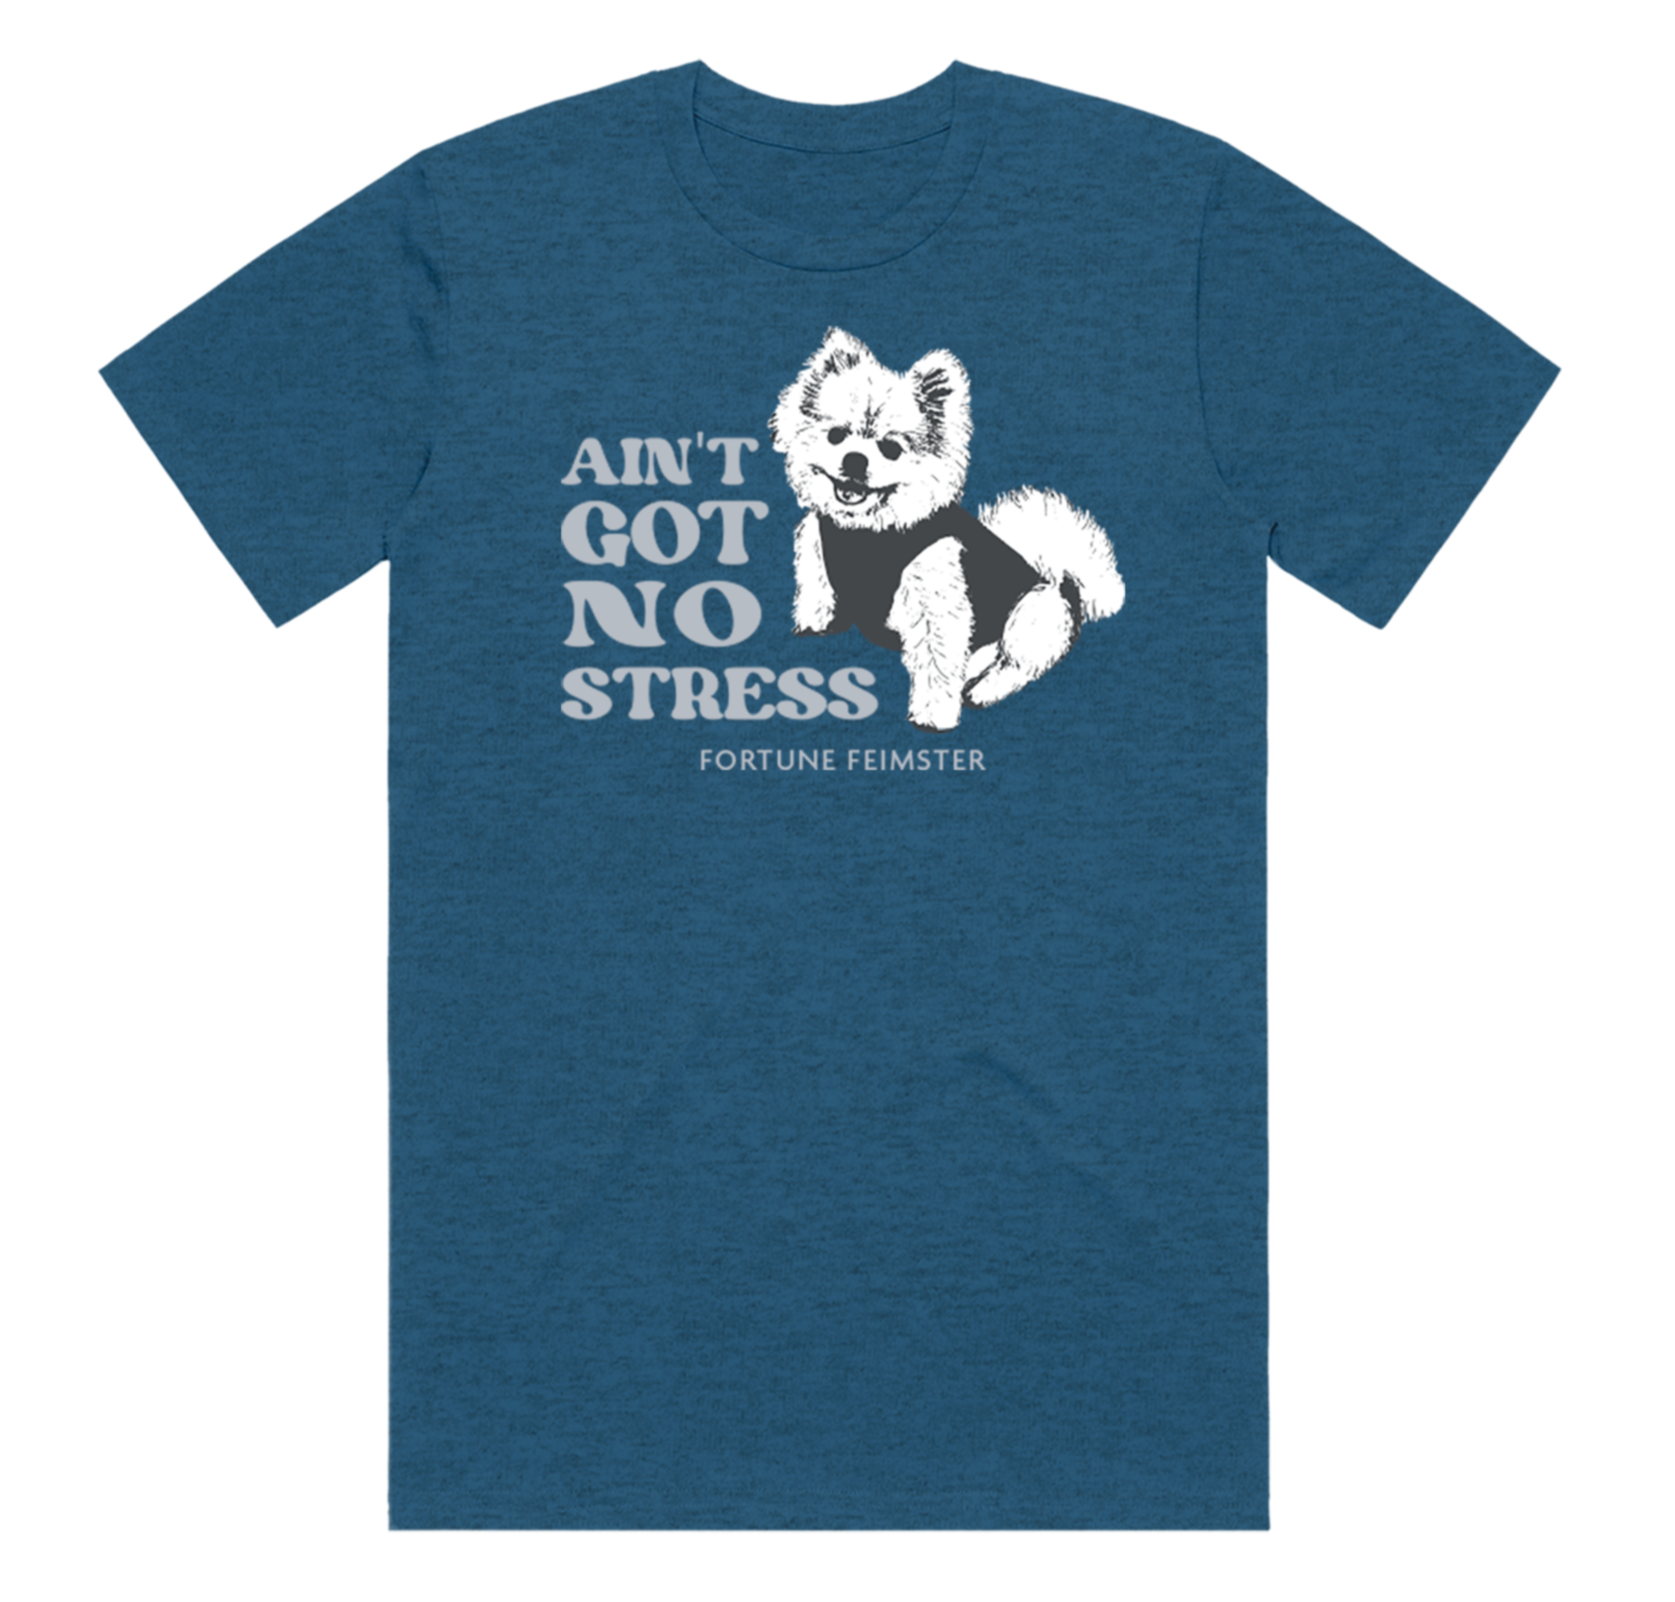 Heather blue tee featuring a photo of Fortune's dog Biggie and the text "Ain't got no stress"